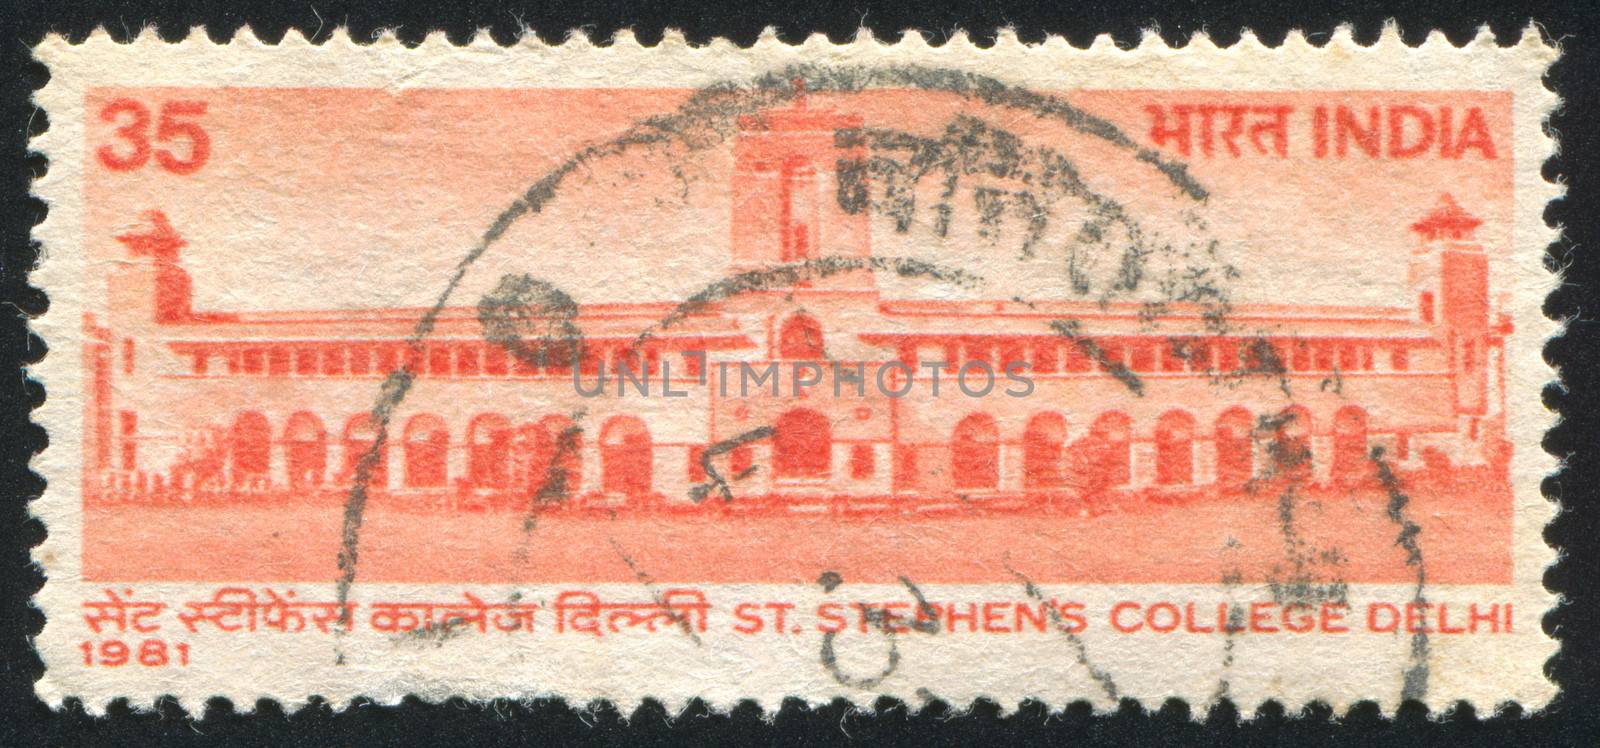 INDIA - CIRCA 1981: stamp printed by India, shows St. Stephen���s College, circa 1981